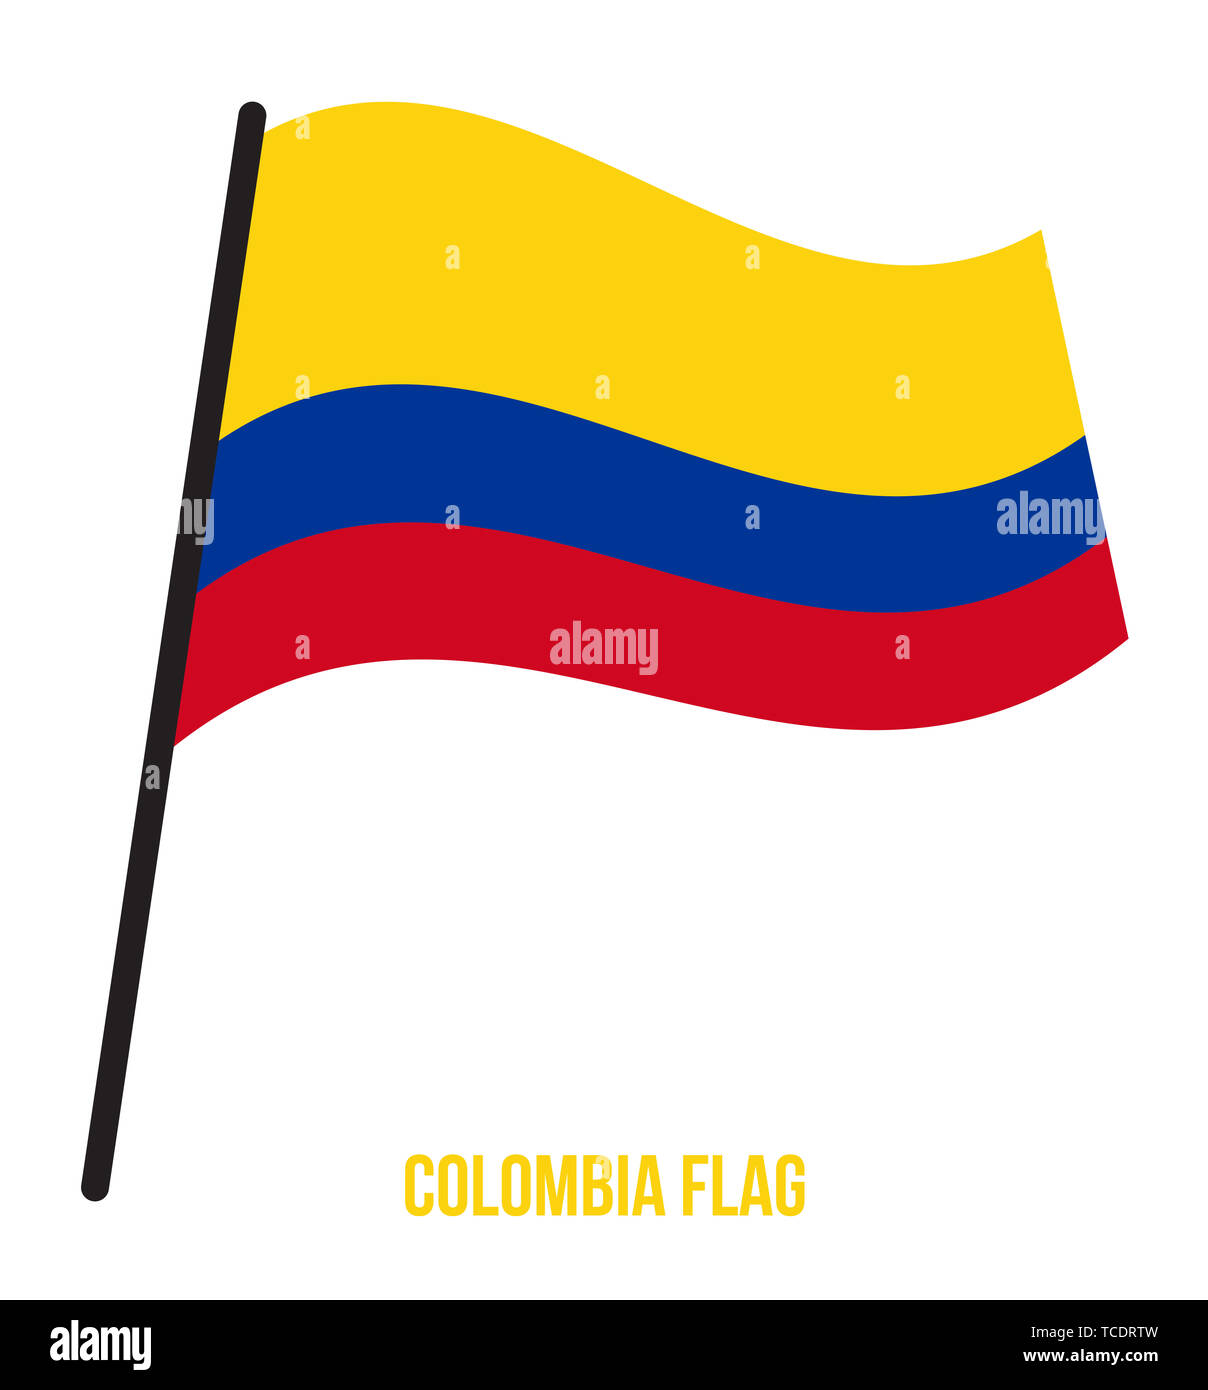 Colombia Flag Waving Vector Illustration on White Background. Colombia National Flag. Stock Photo